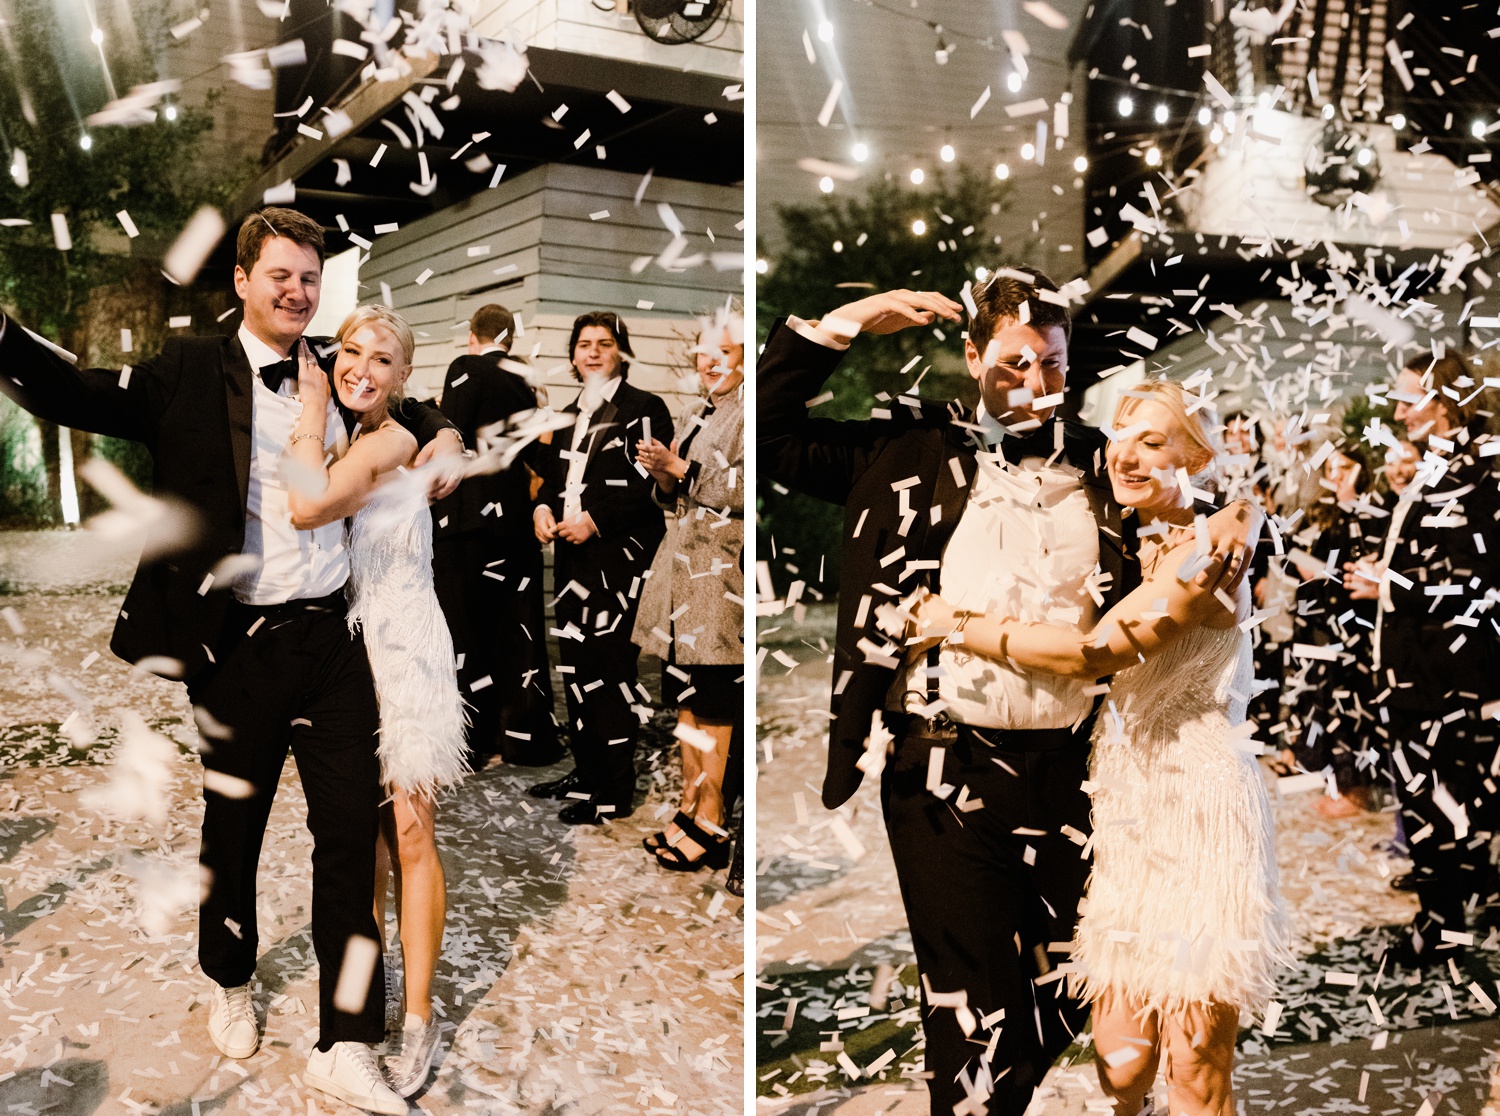 Guests throwing confetti on the bride and groom for their wedding send-off